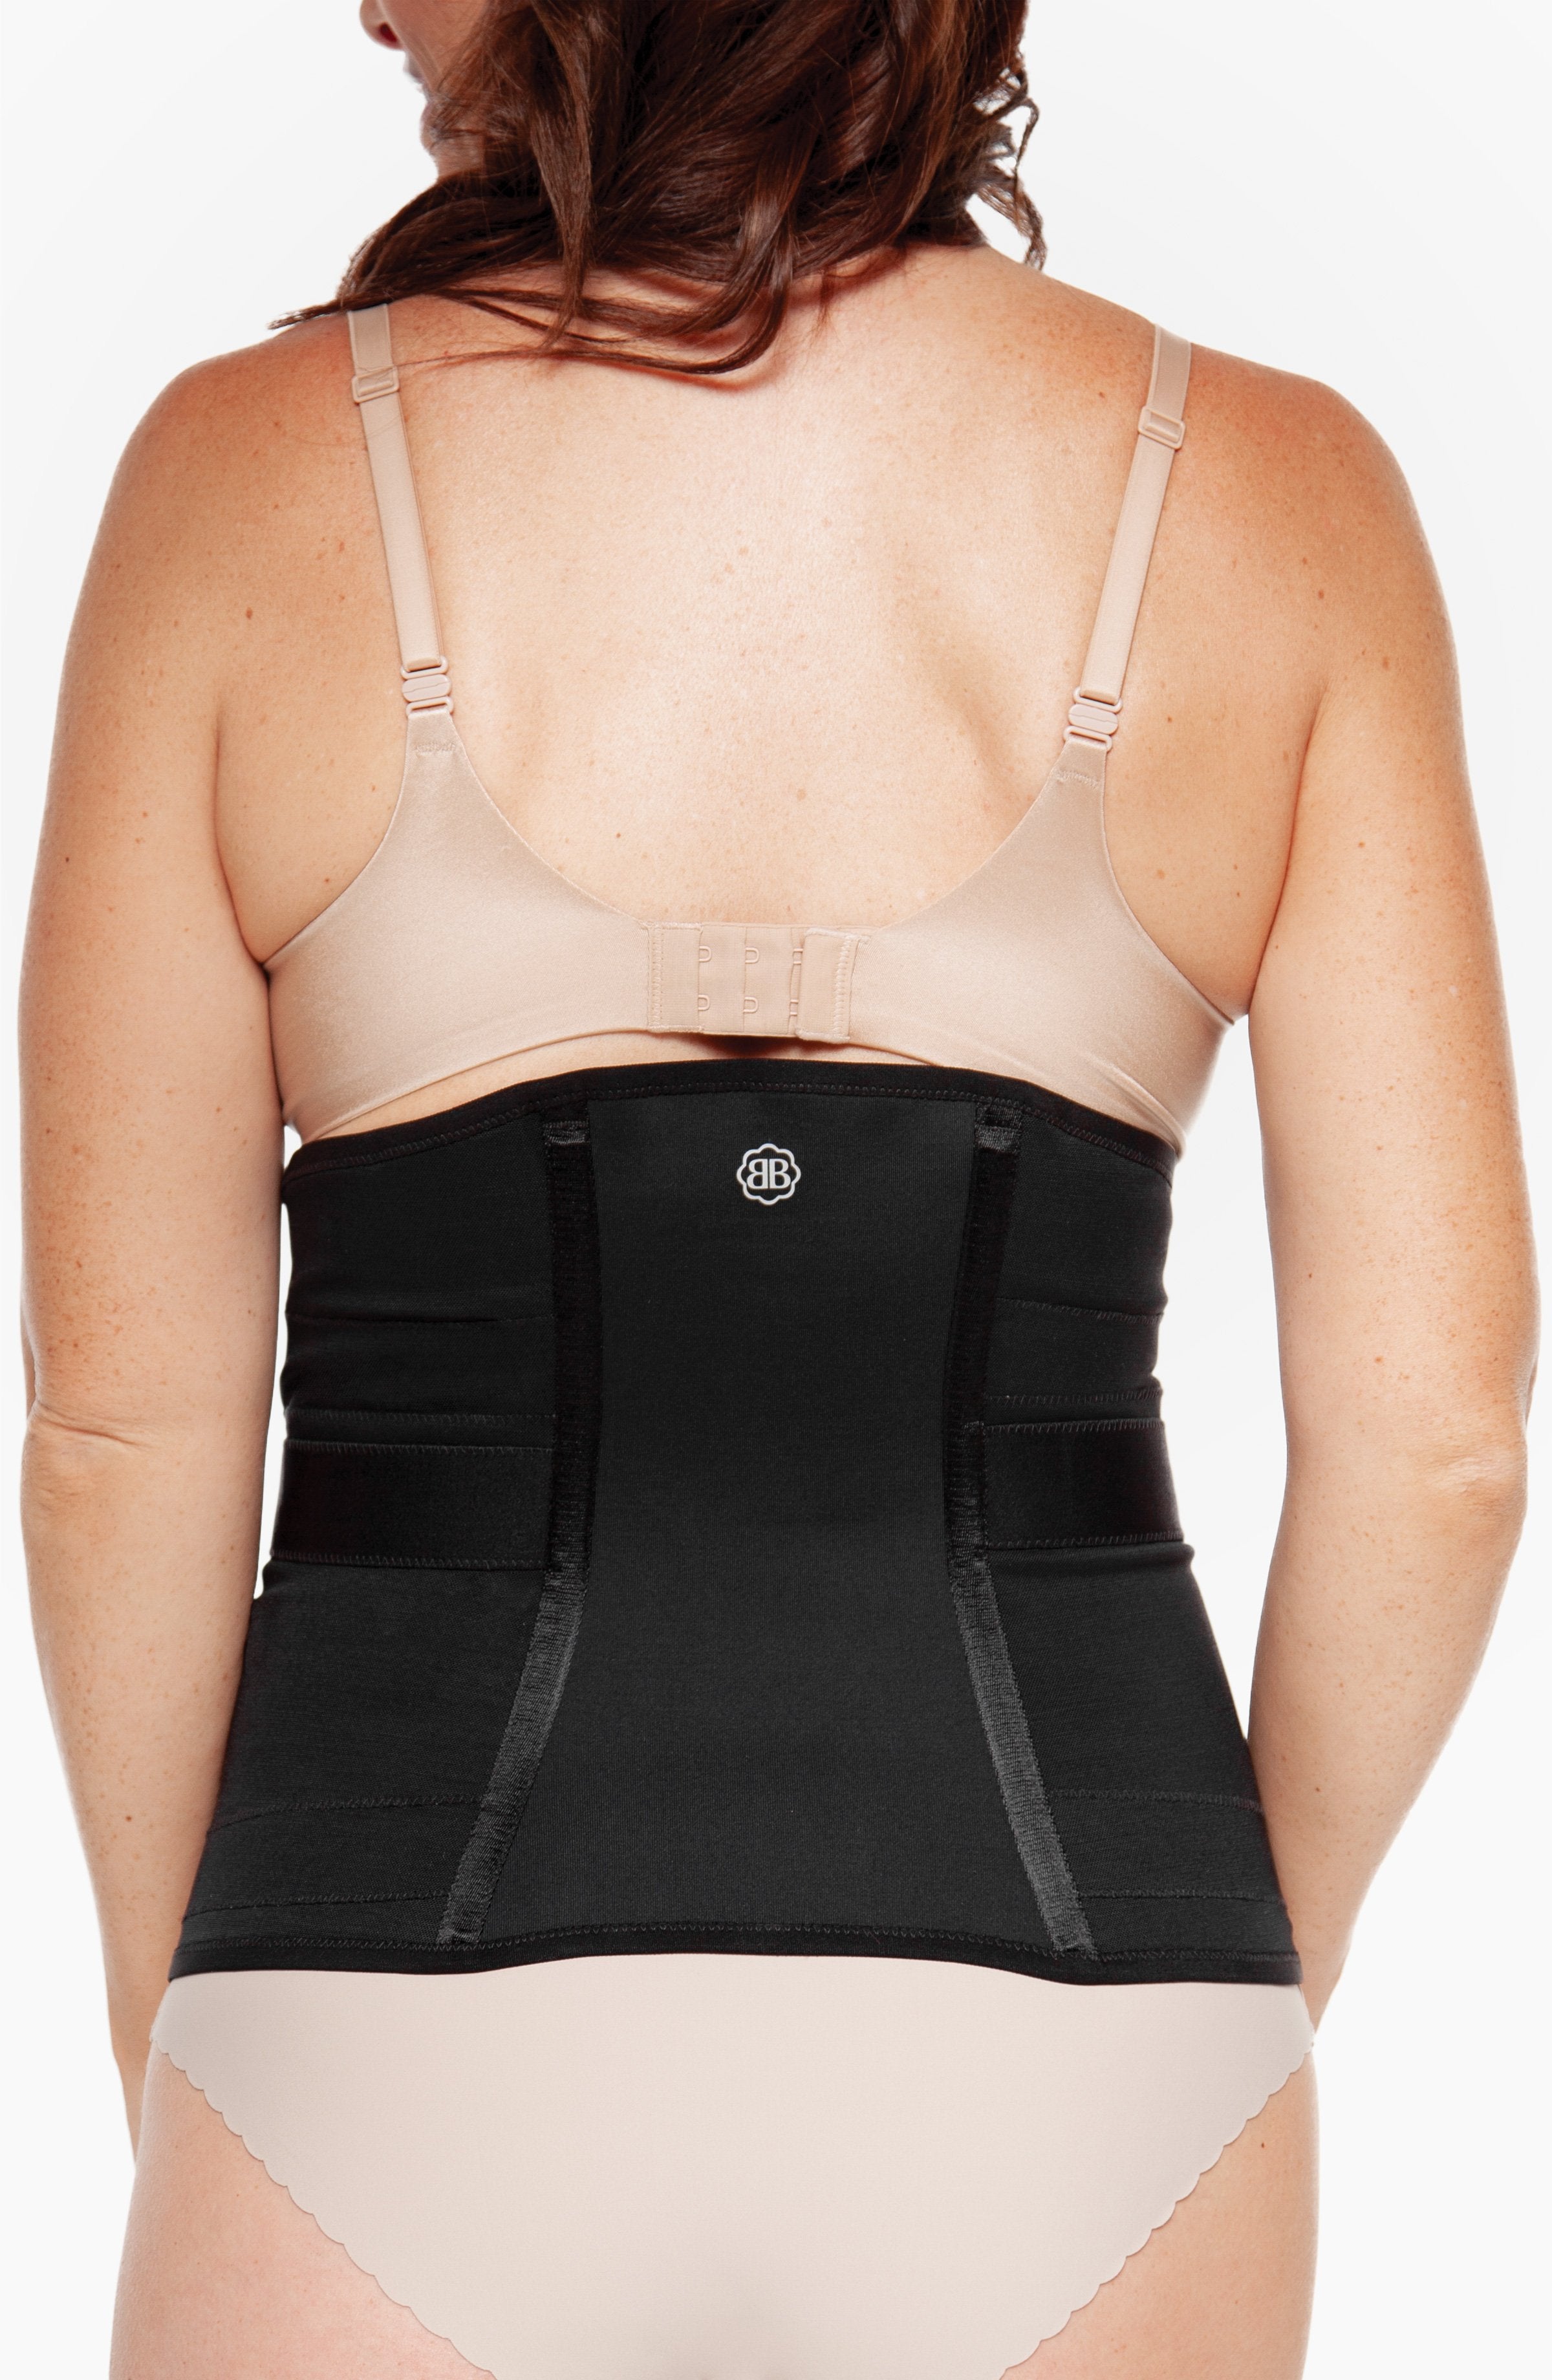 MOTHER TUCKER Belly Compression Corset – The Full Cup